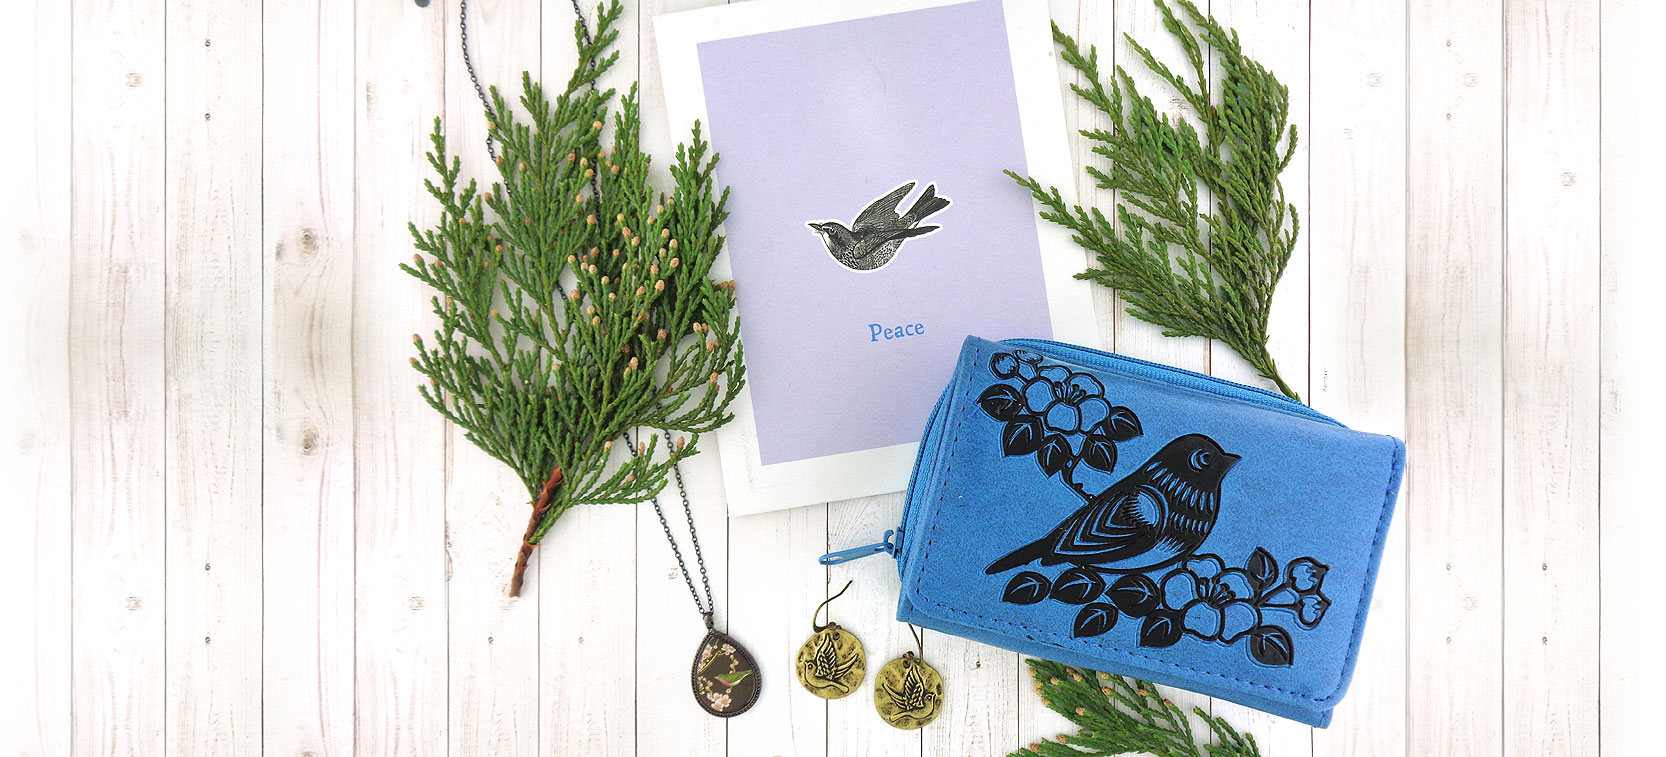 LAVISHY design and wholesale sparrow themed vegan accessories and gfits to gift shops, boutiques and book shops, souvenir stores in Canada, USA and worldwide.